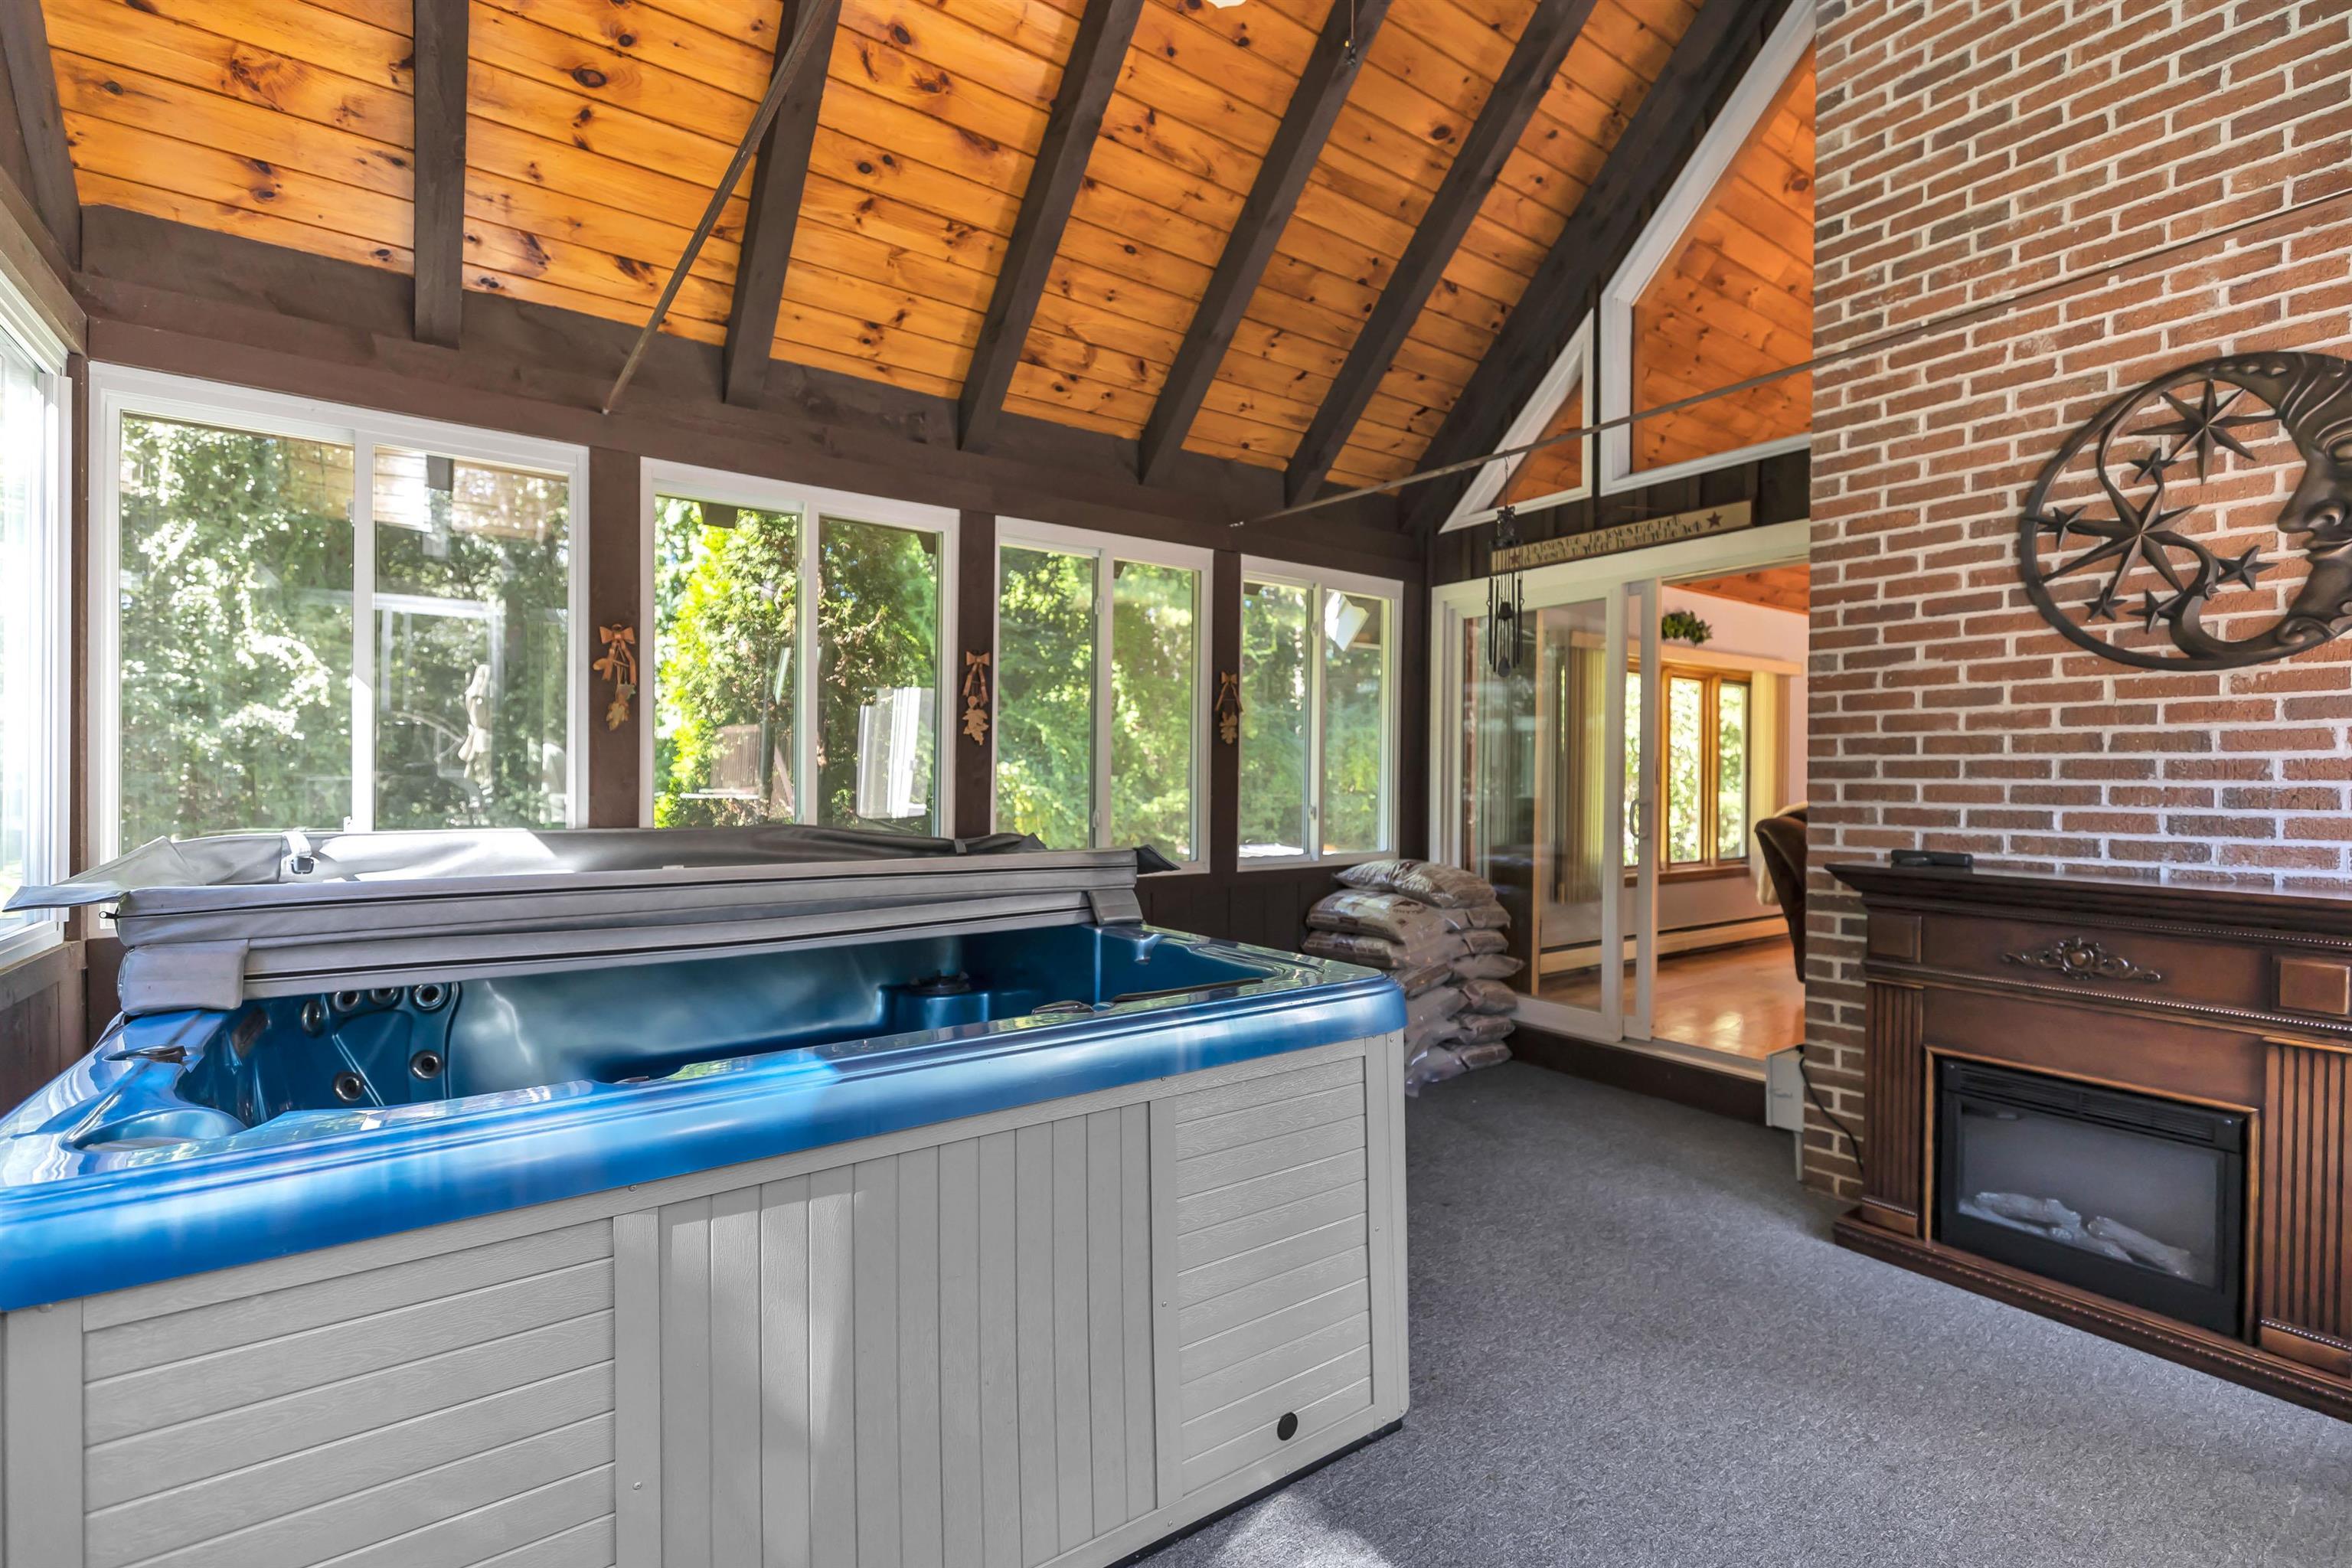 Enclosed porch with hot tub and electric "fireplace"